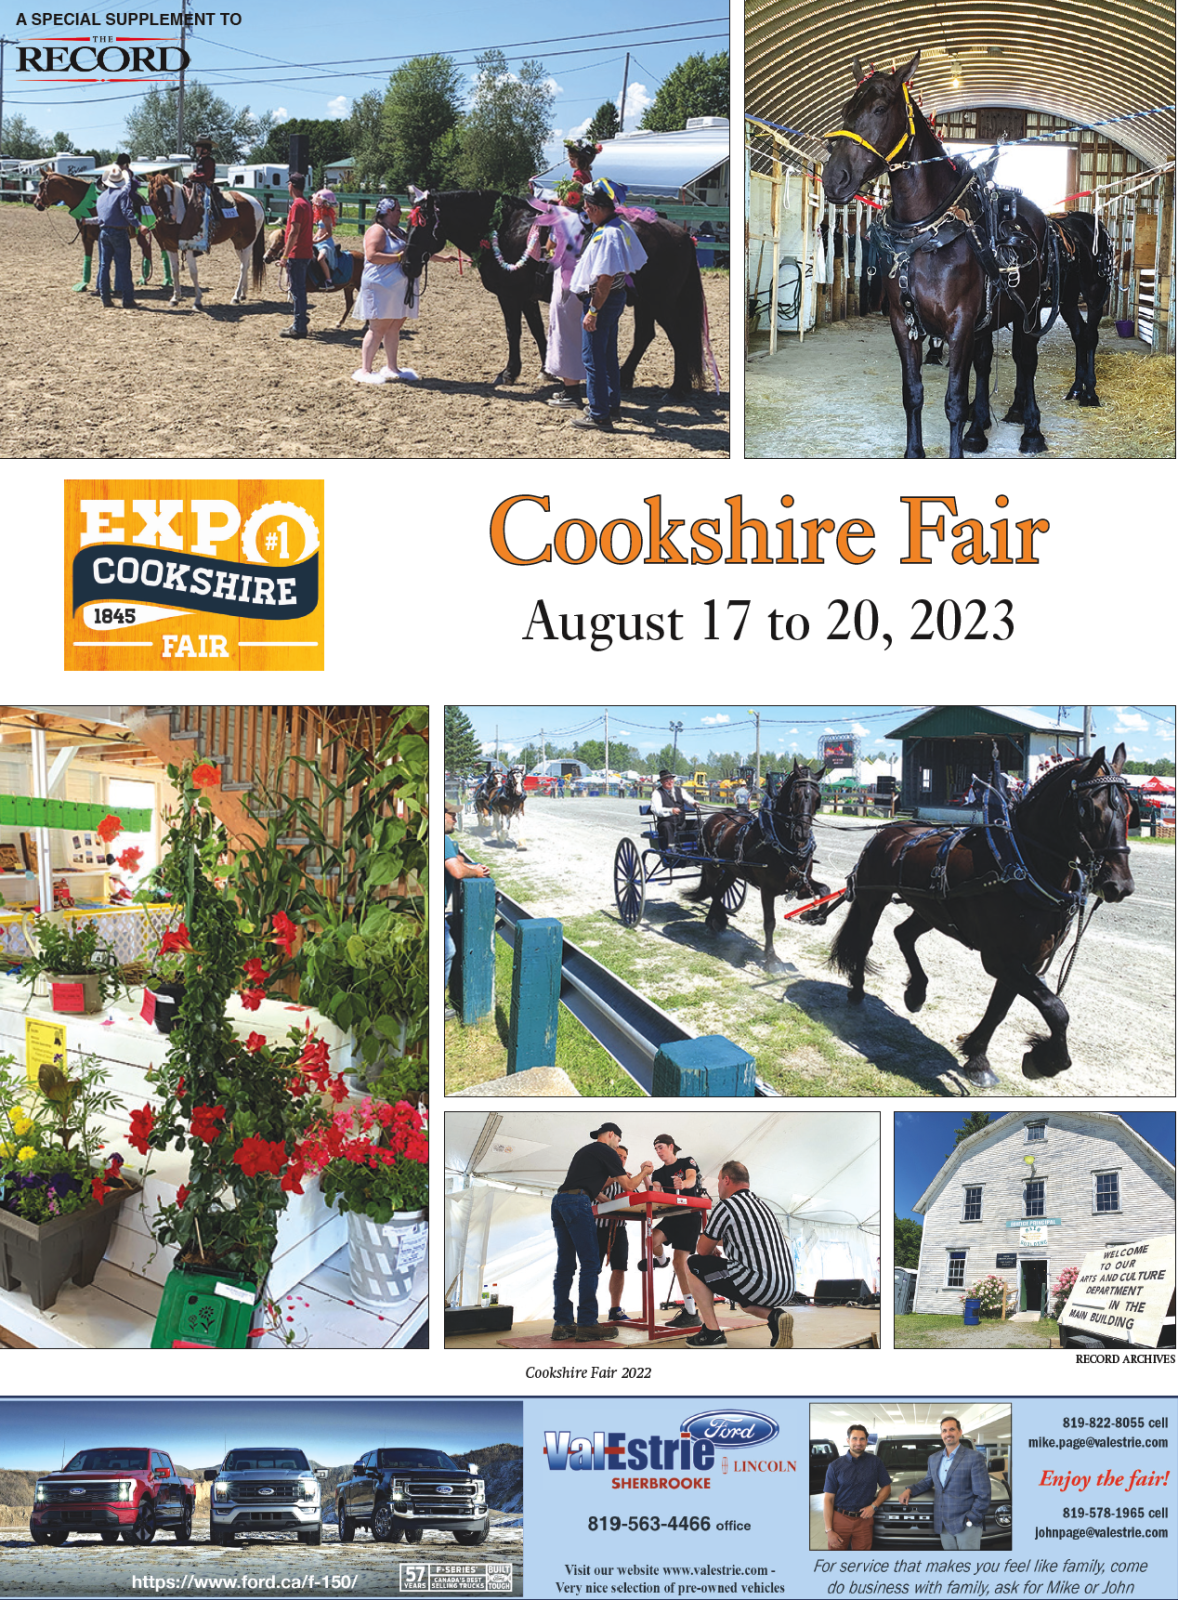 Cookshire Fair August 17 to 20, 2023